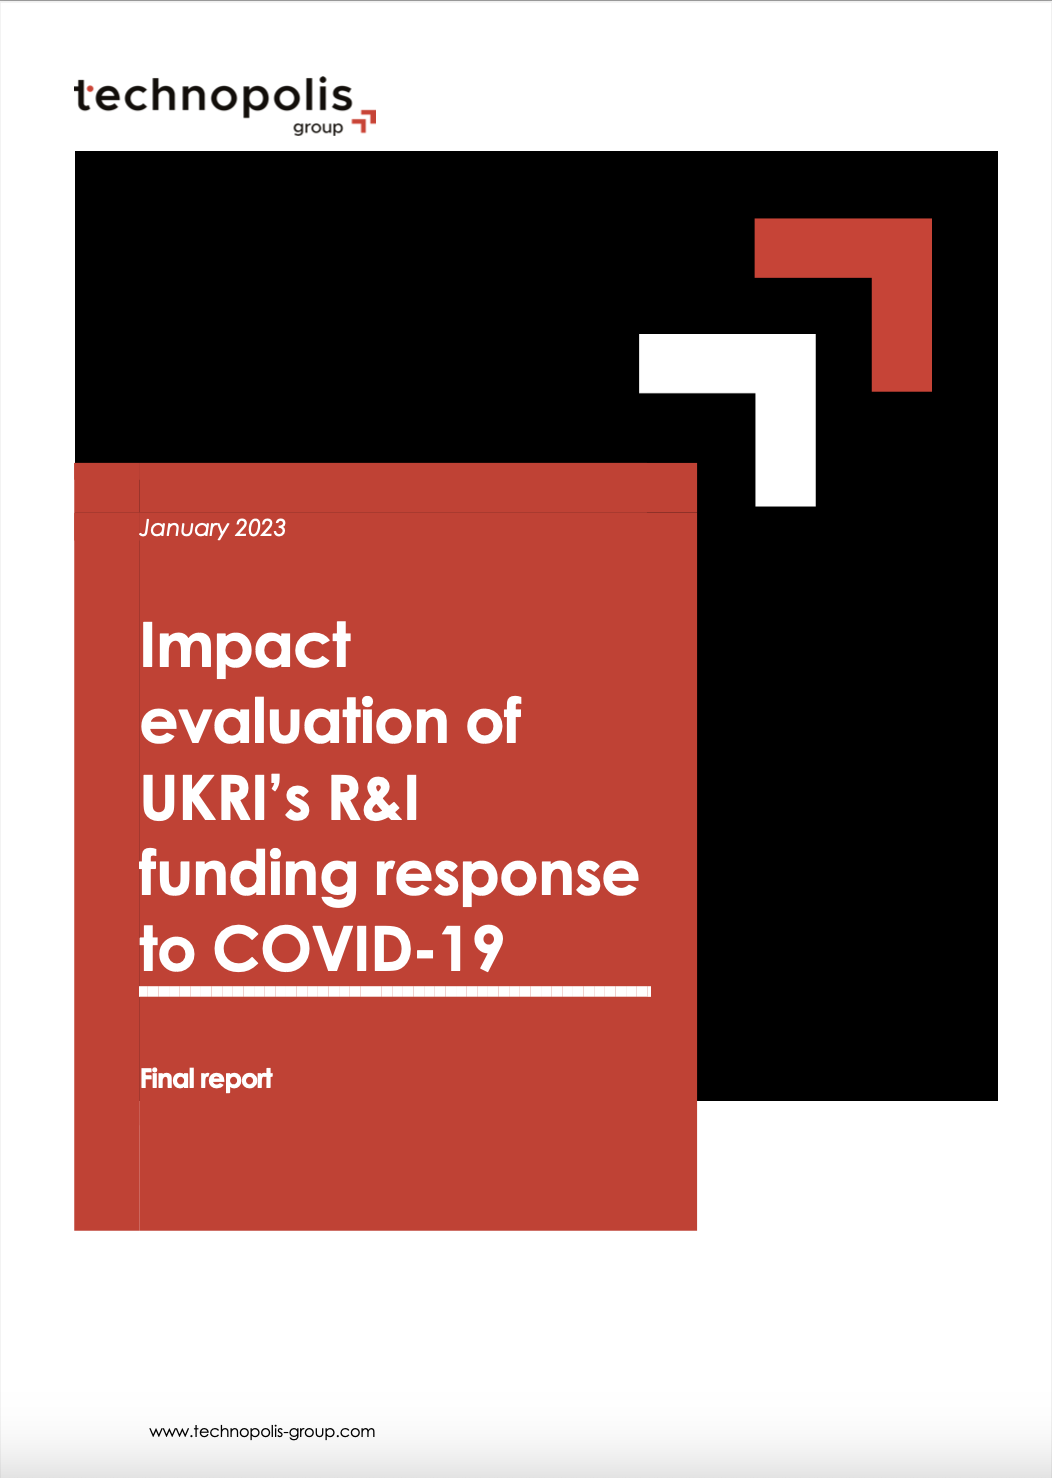 Impact evaluation of UKRI’s research and innovation funding response to COVID-19